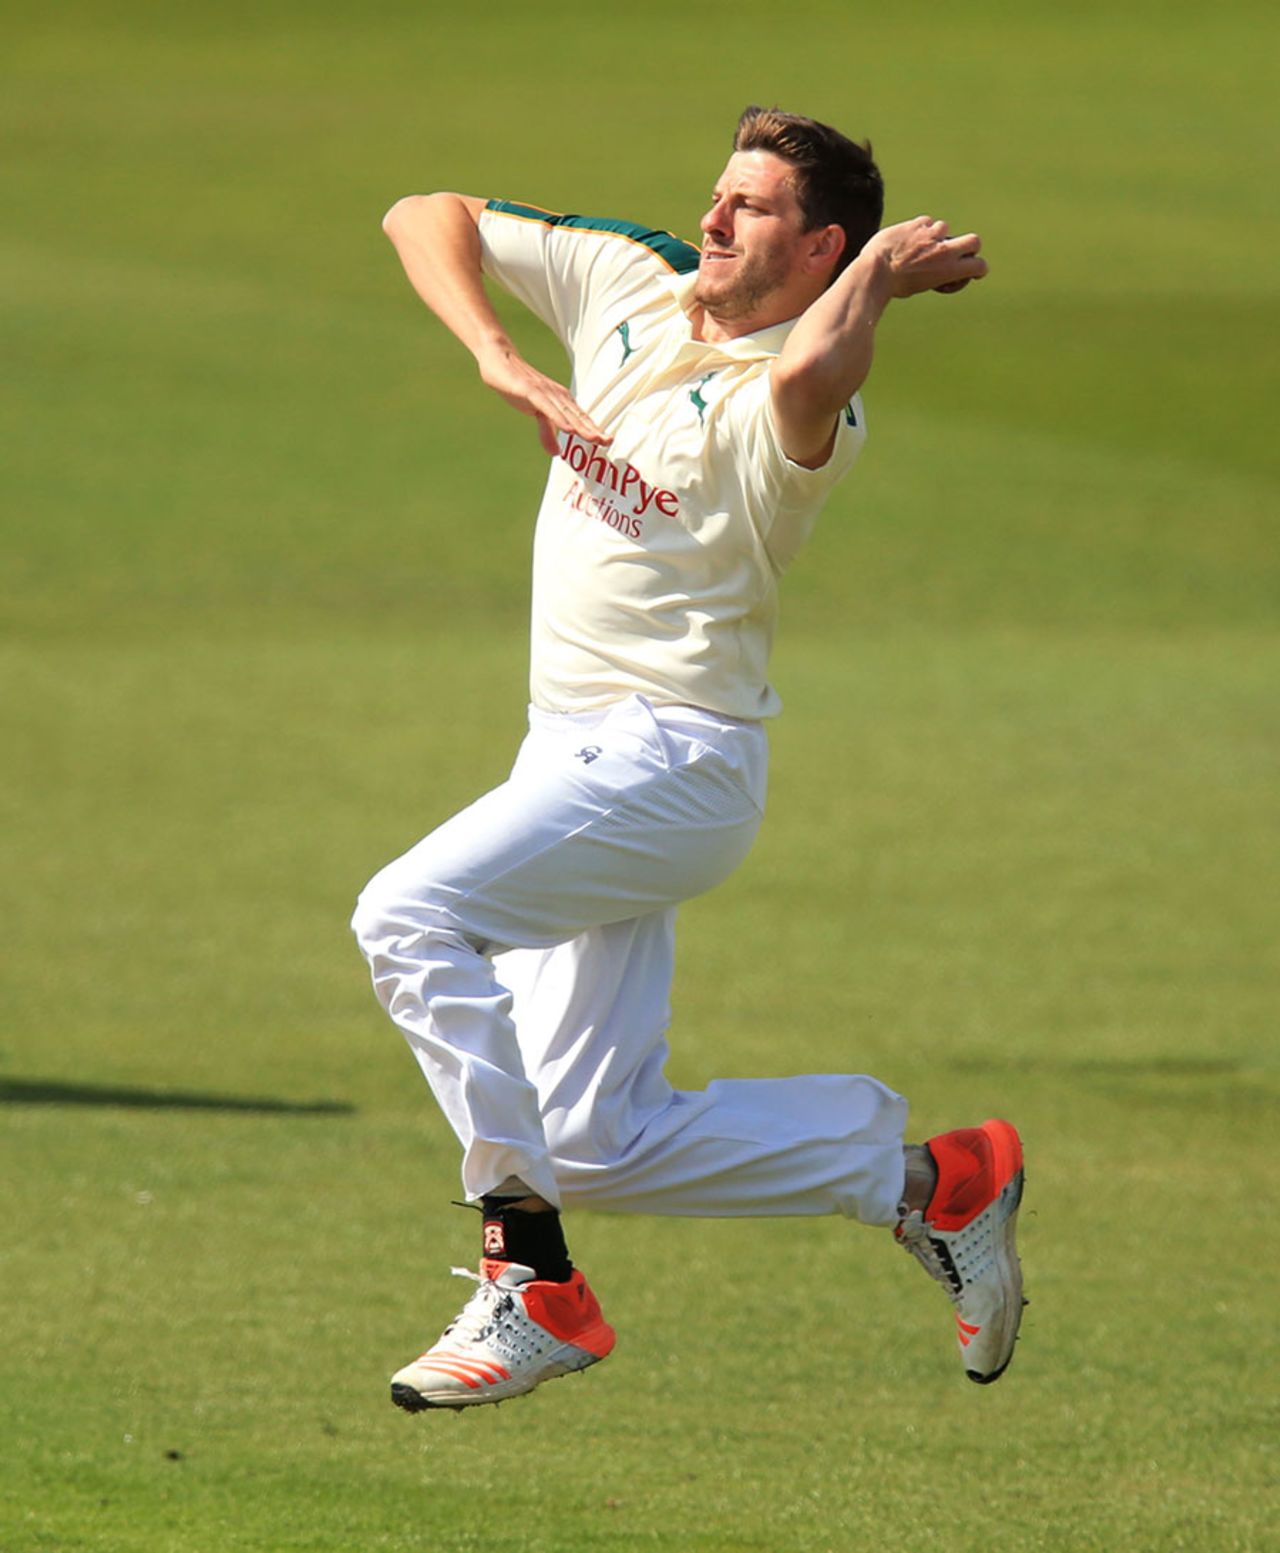 Harry Gurney took three wickets, Nottinghamshire v Yorkshire, County Championship Division One, Trent Bridge, 3rd day, April 21, 2015